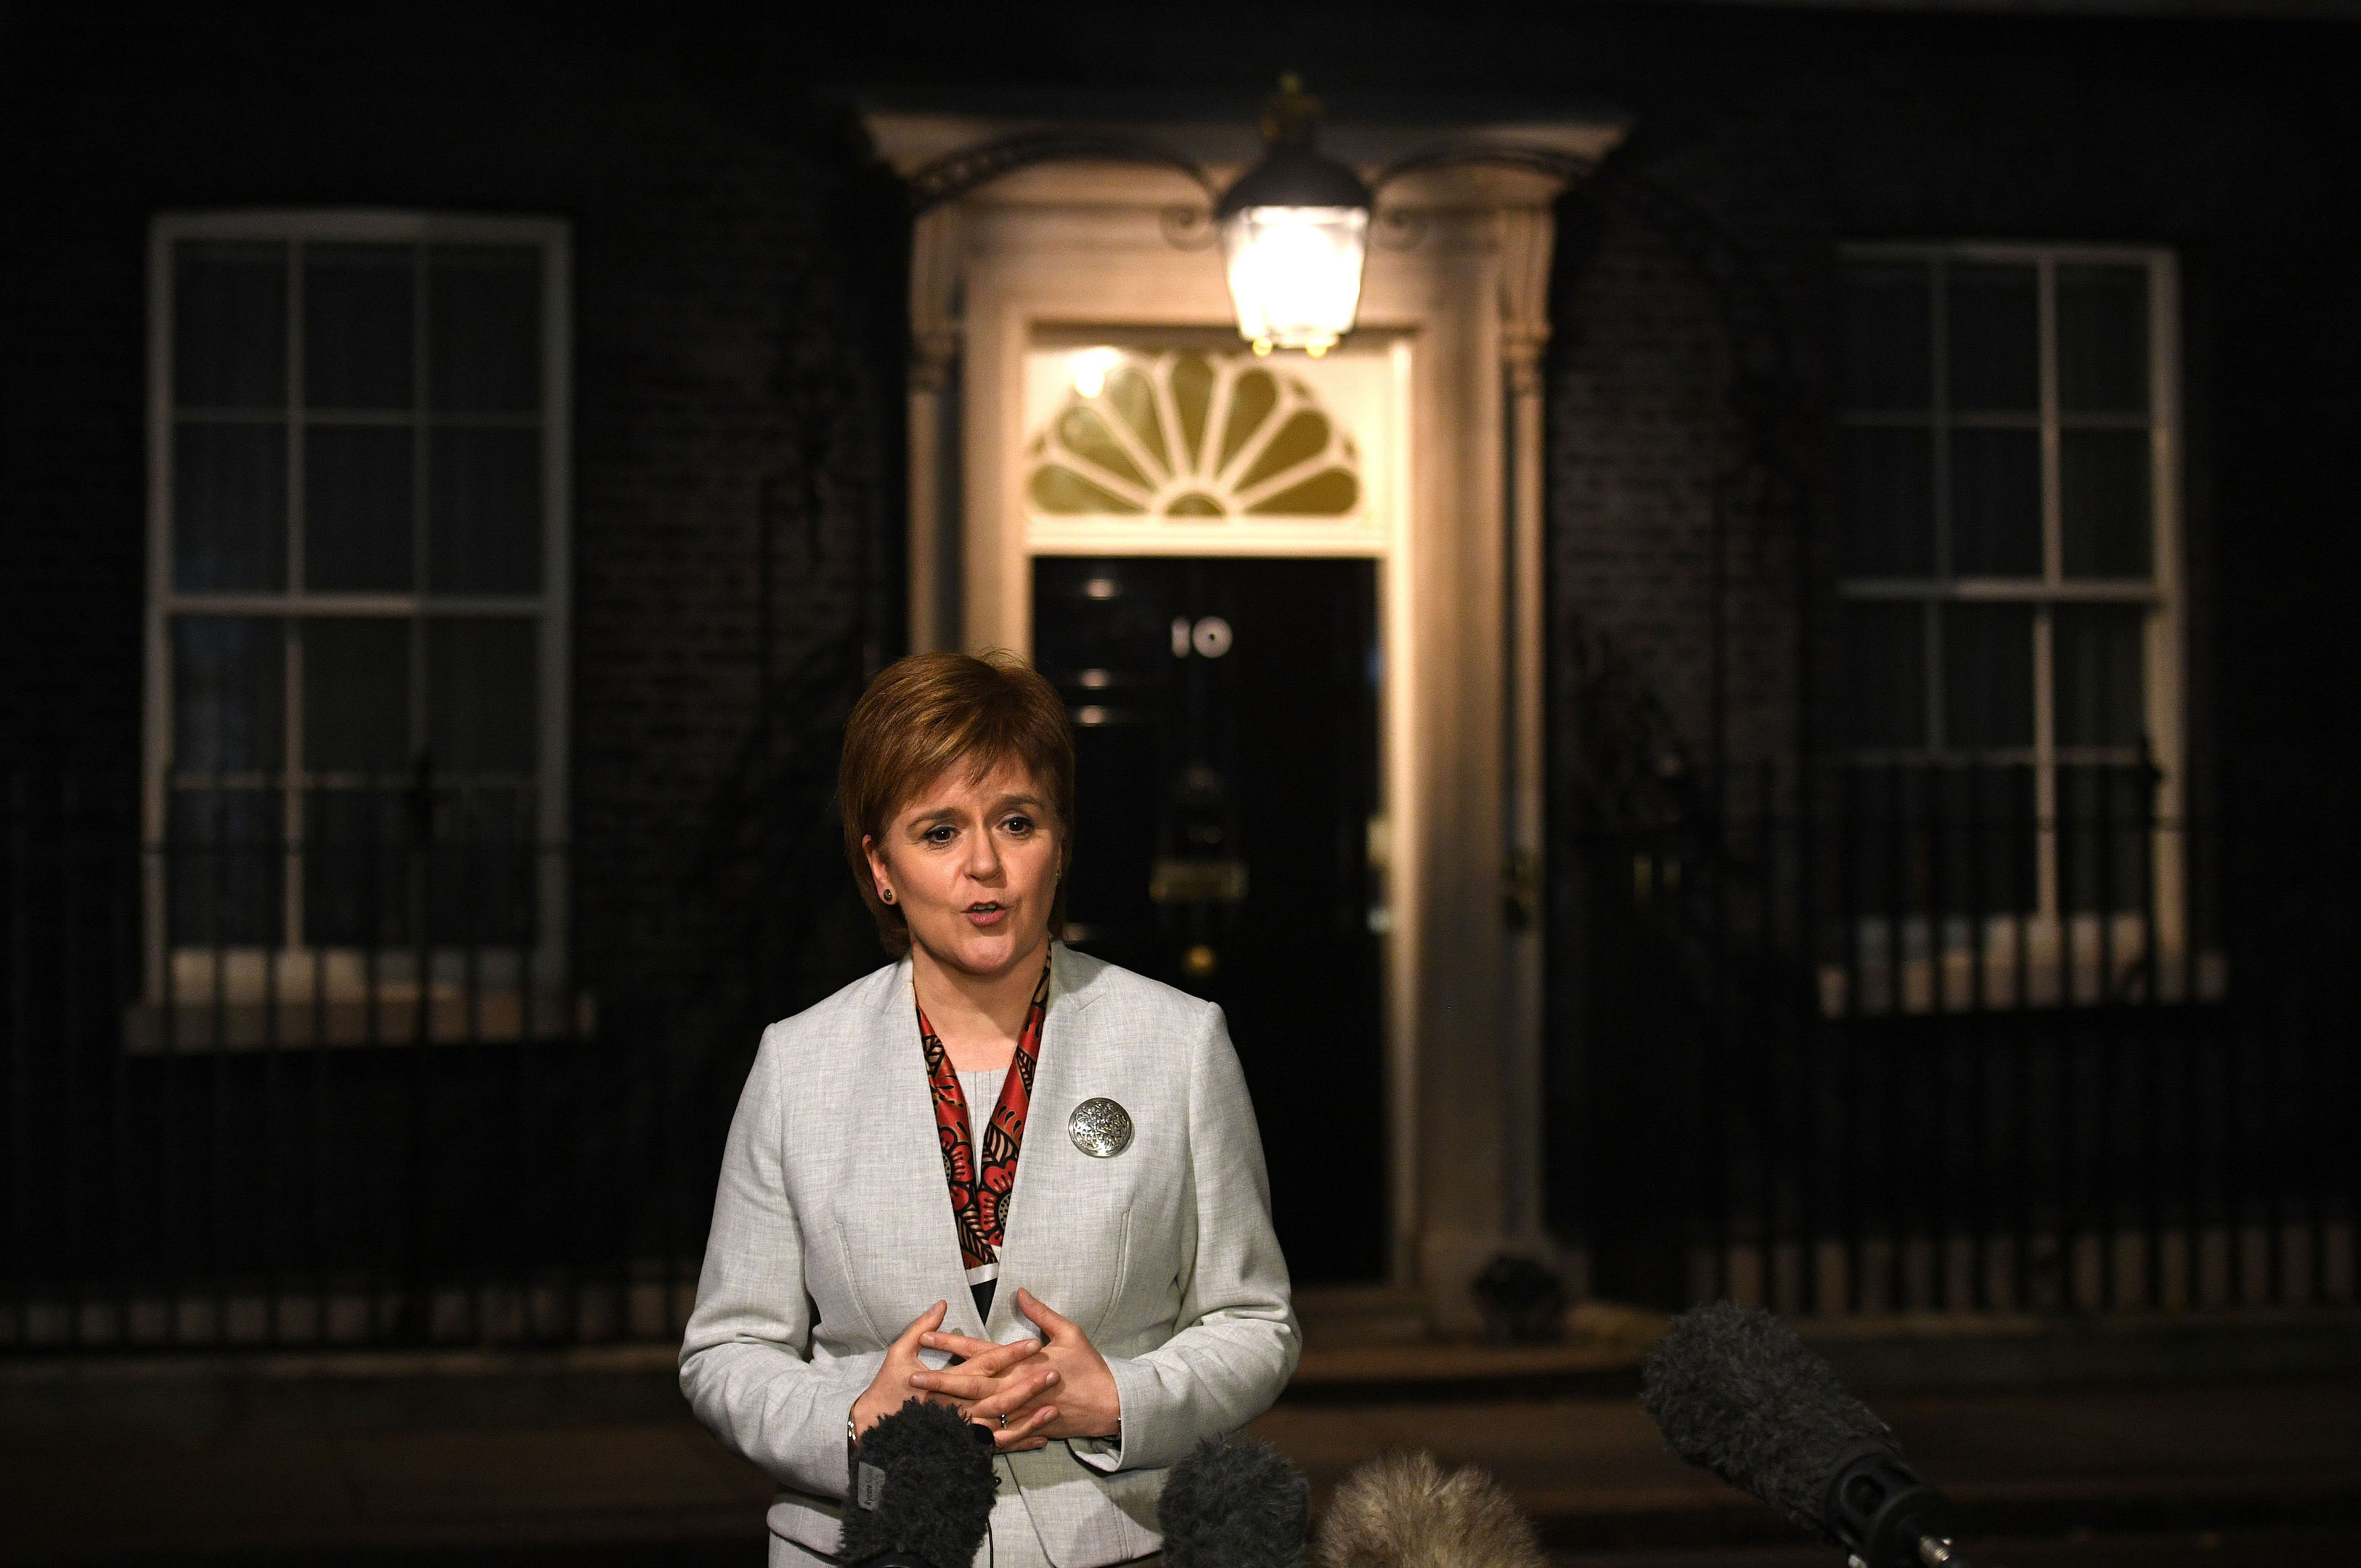 Scottish First Minister Nicola Sturgeon speaks to the media outside 10 Downing Street, London, after talks with Prime Minister Theresa May. PRESS ASSOCIATION Photo. Picture date: Tuesday November 14, 2017. Photo credit should read: Stefan Rousseau/PA Wire